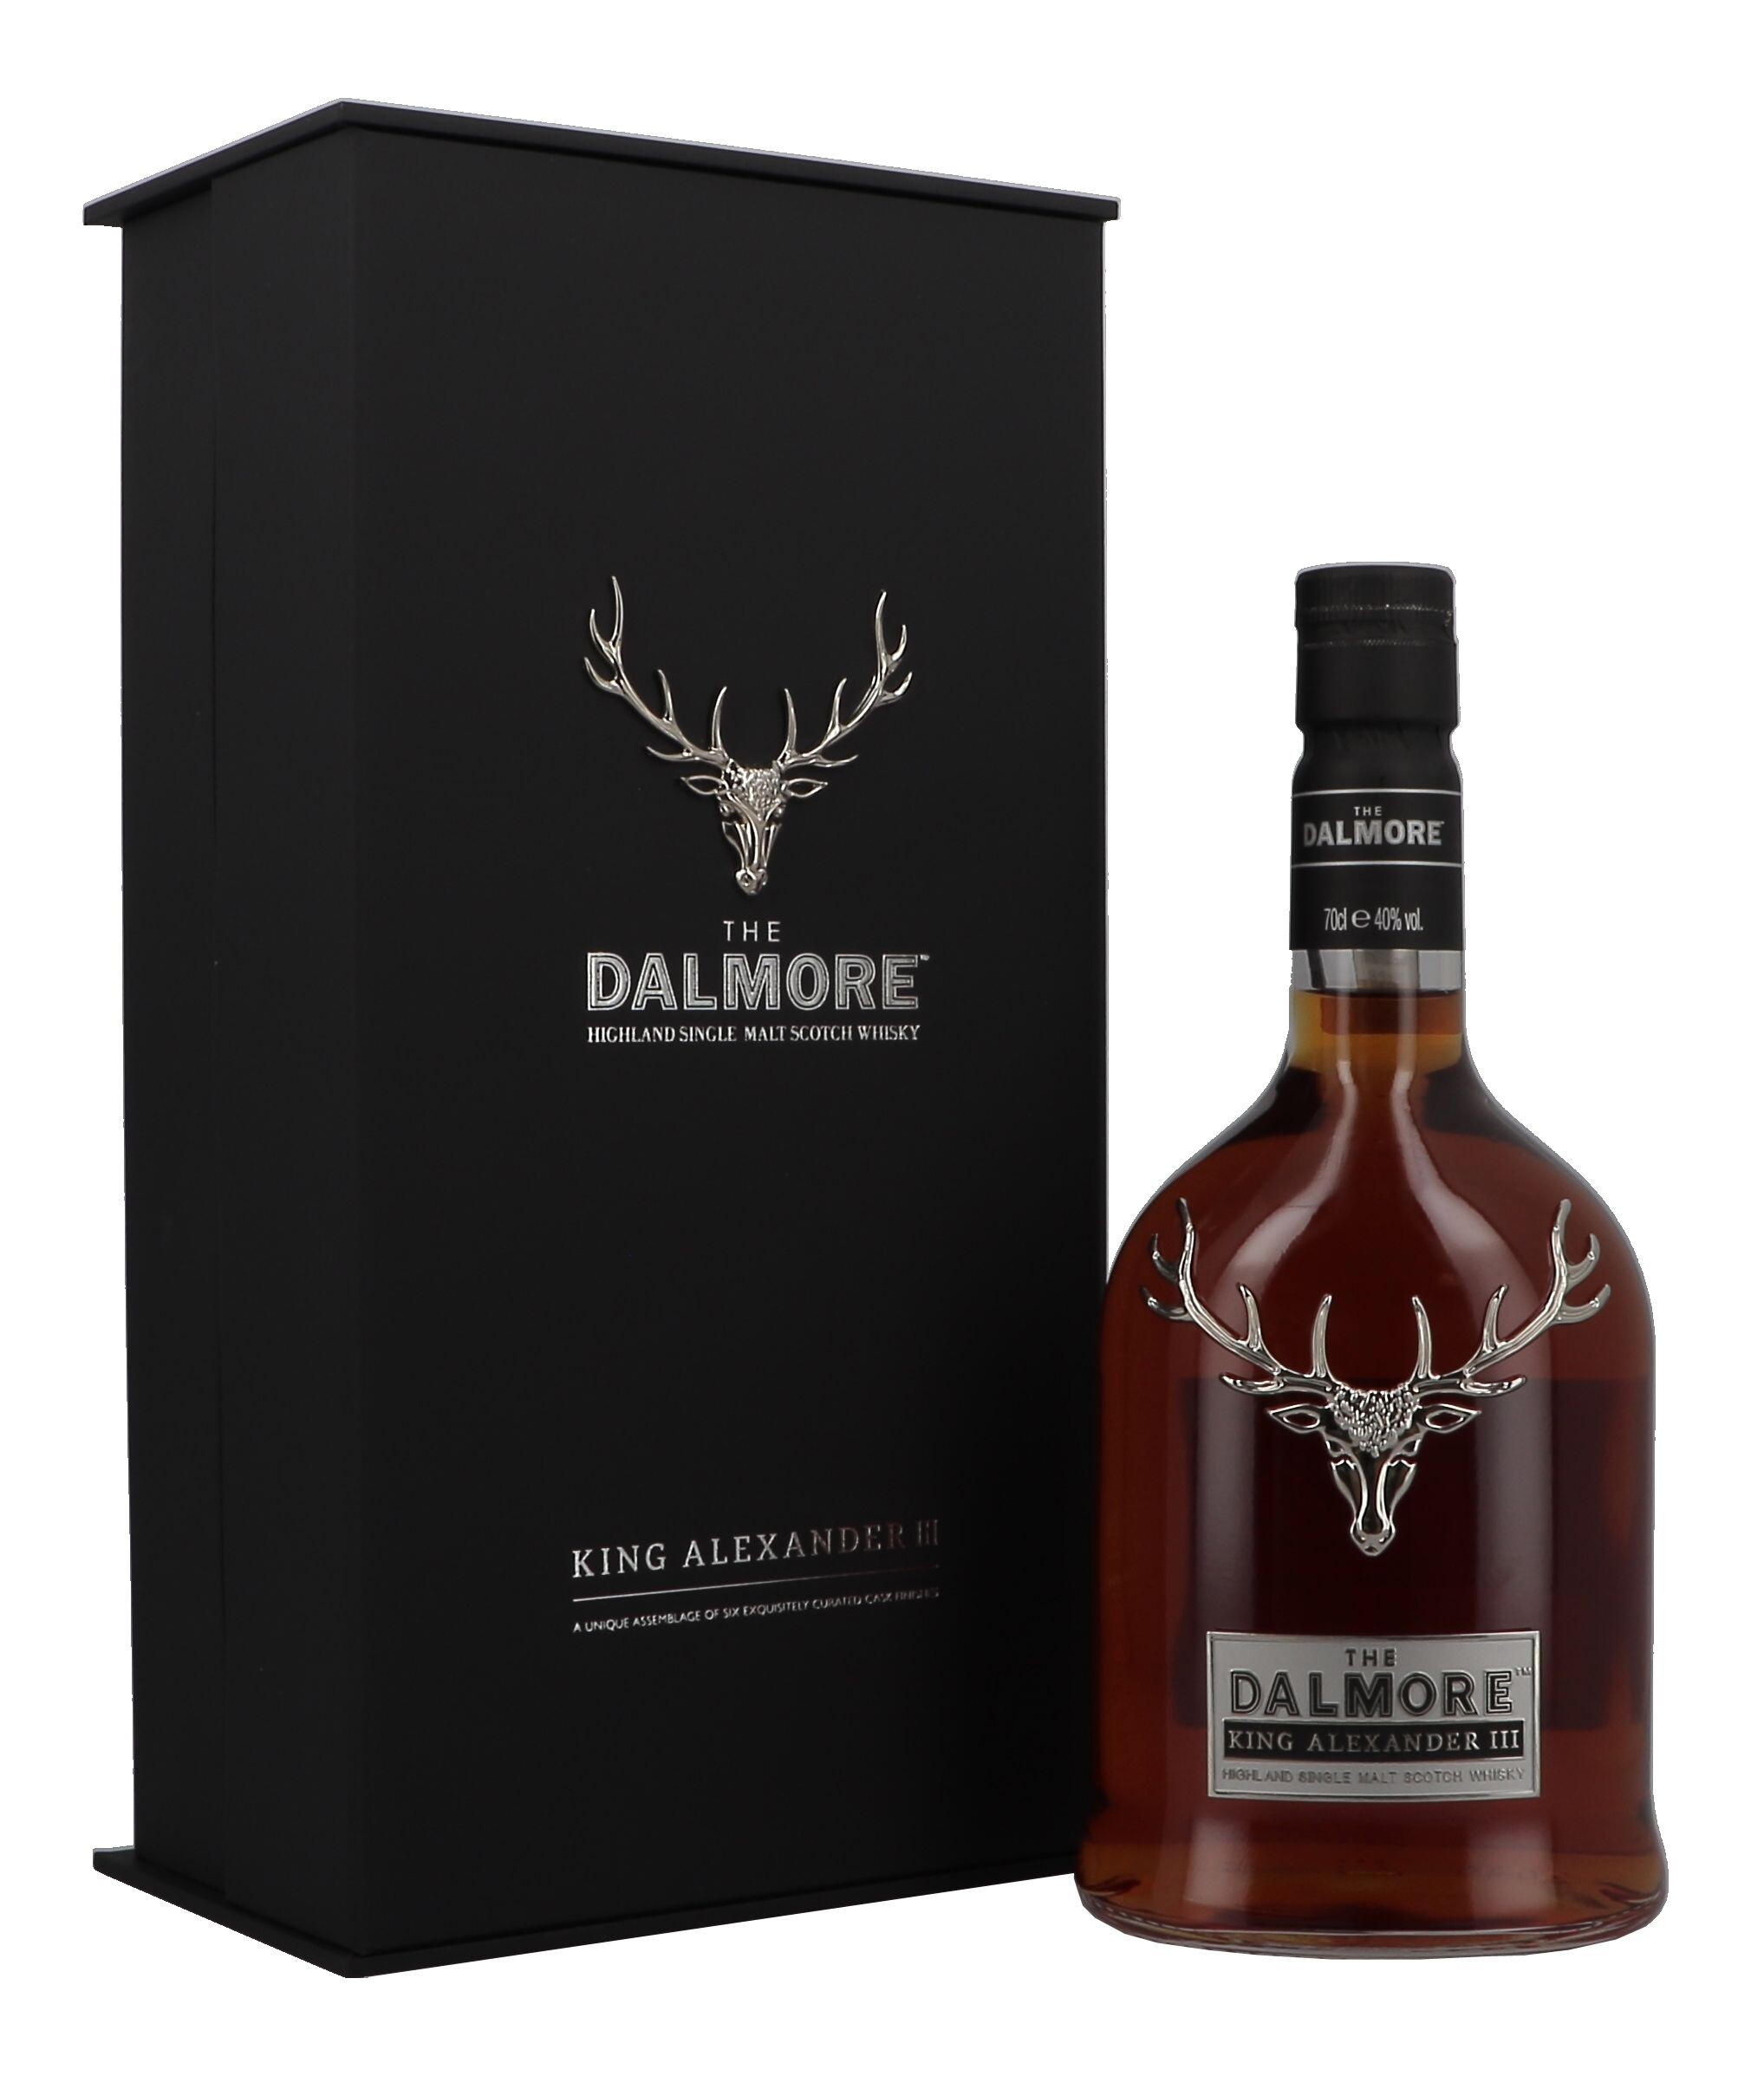 The Dalmore 18 Years Old 70cl 43% Highlands Single Malt Scotch Whisky 